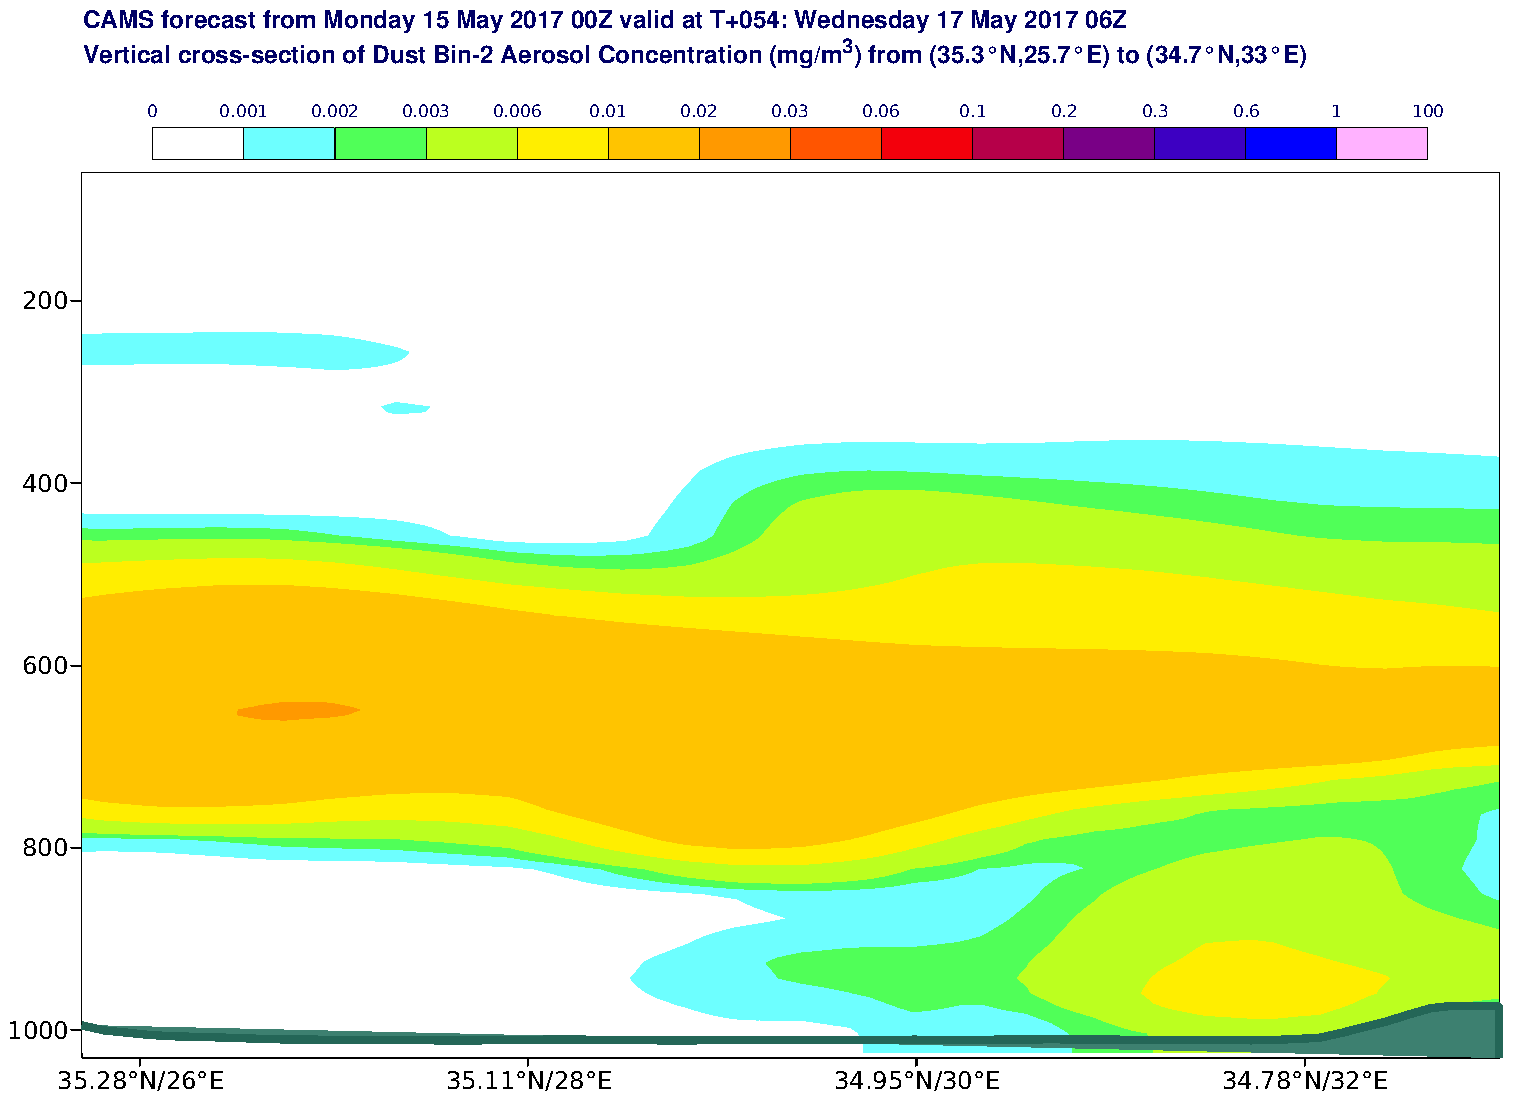 Vertical cross-section of Dust Bin-2 Aerosol Concentration (mg/m3) valid at T54 - 2017-05-17 06:00